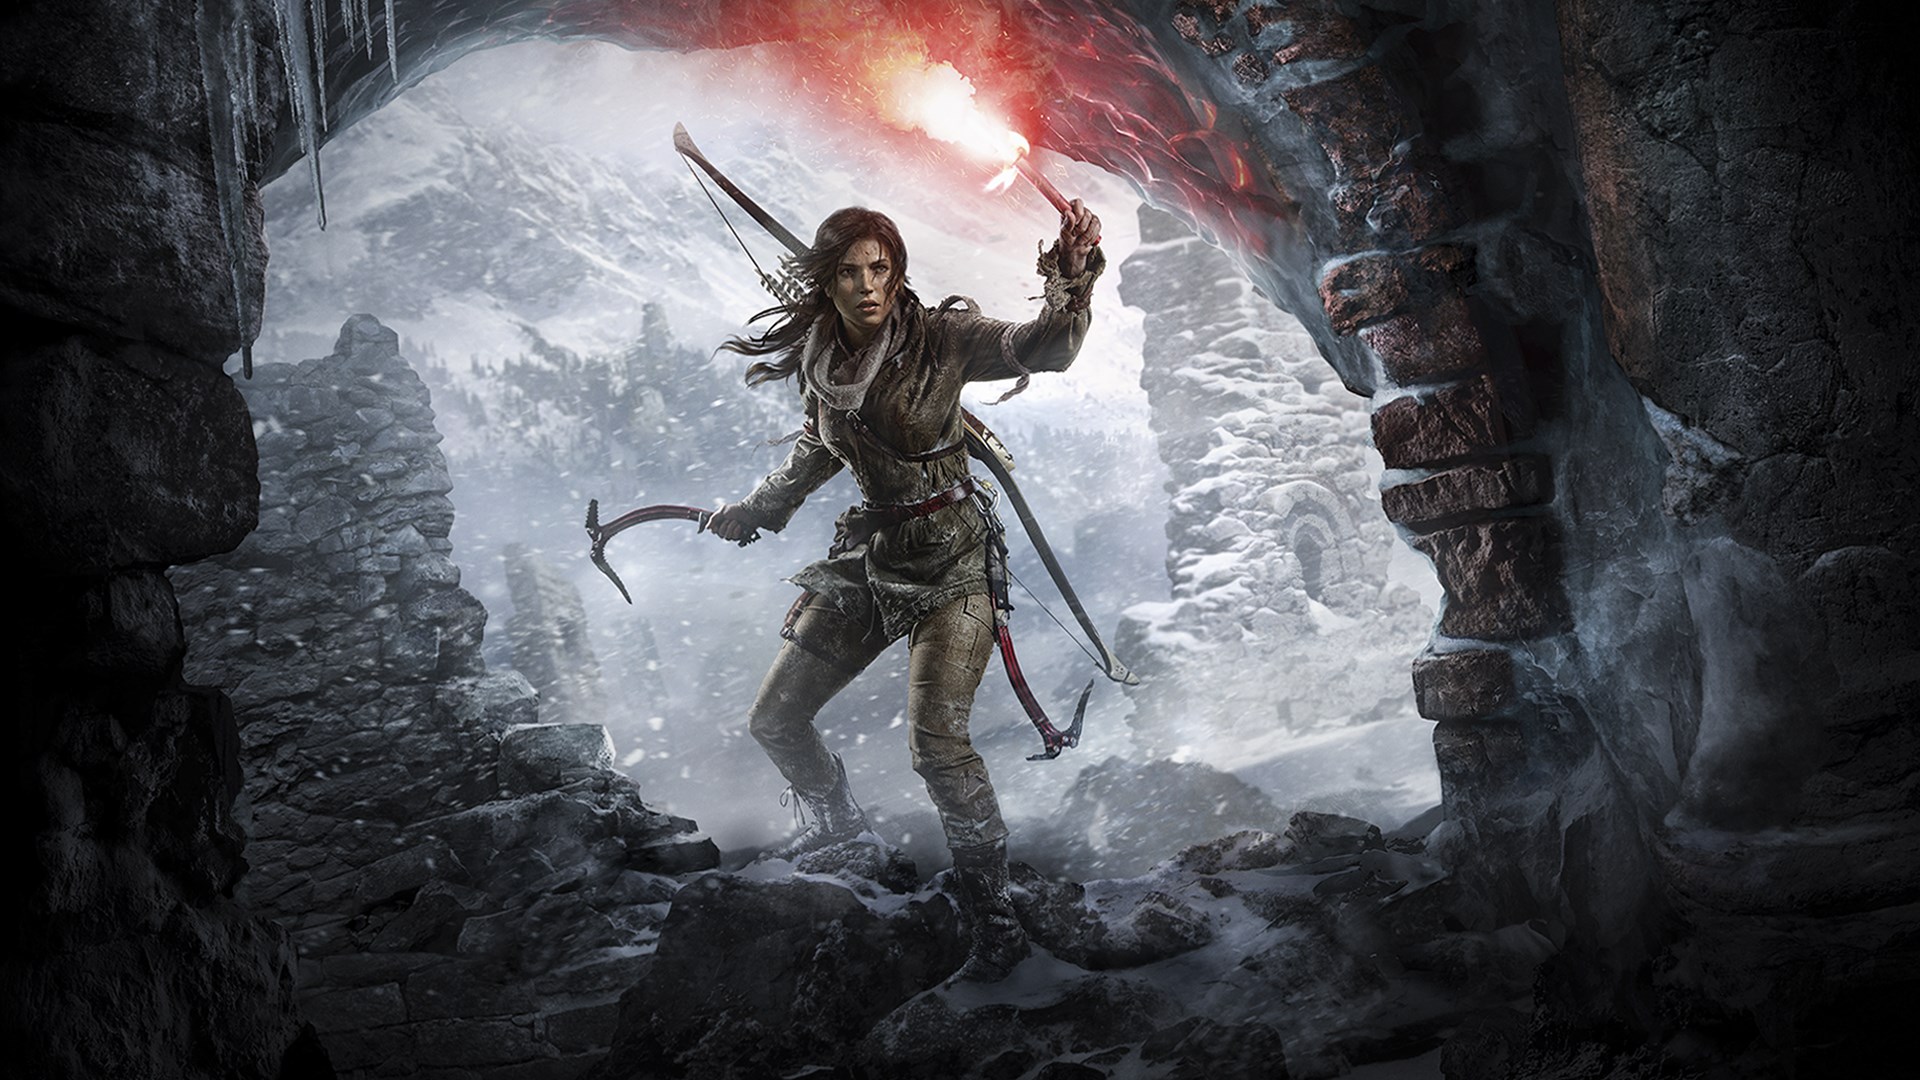 rise of the tomb raider xbox 360